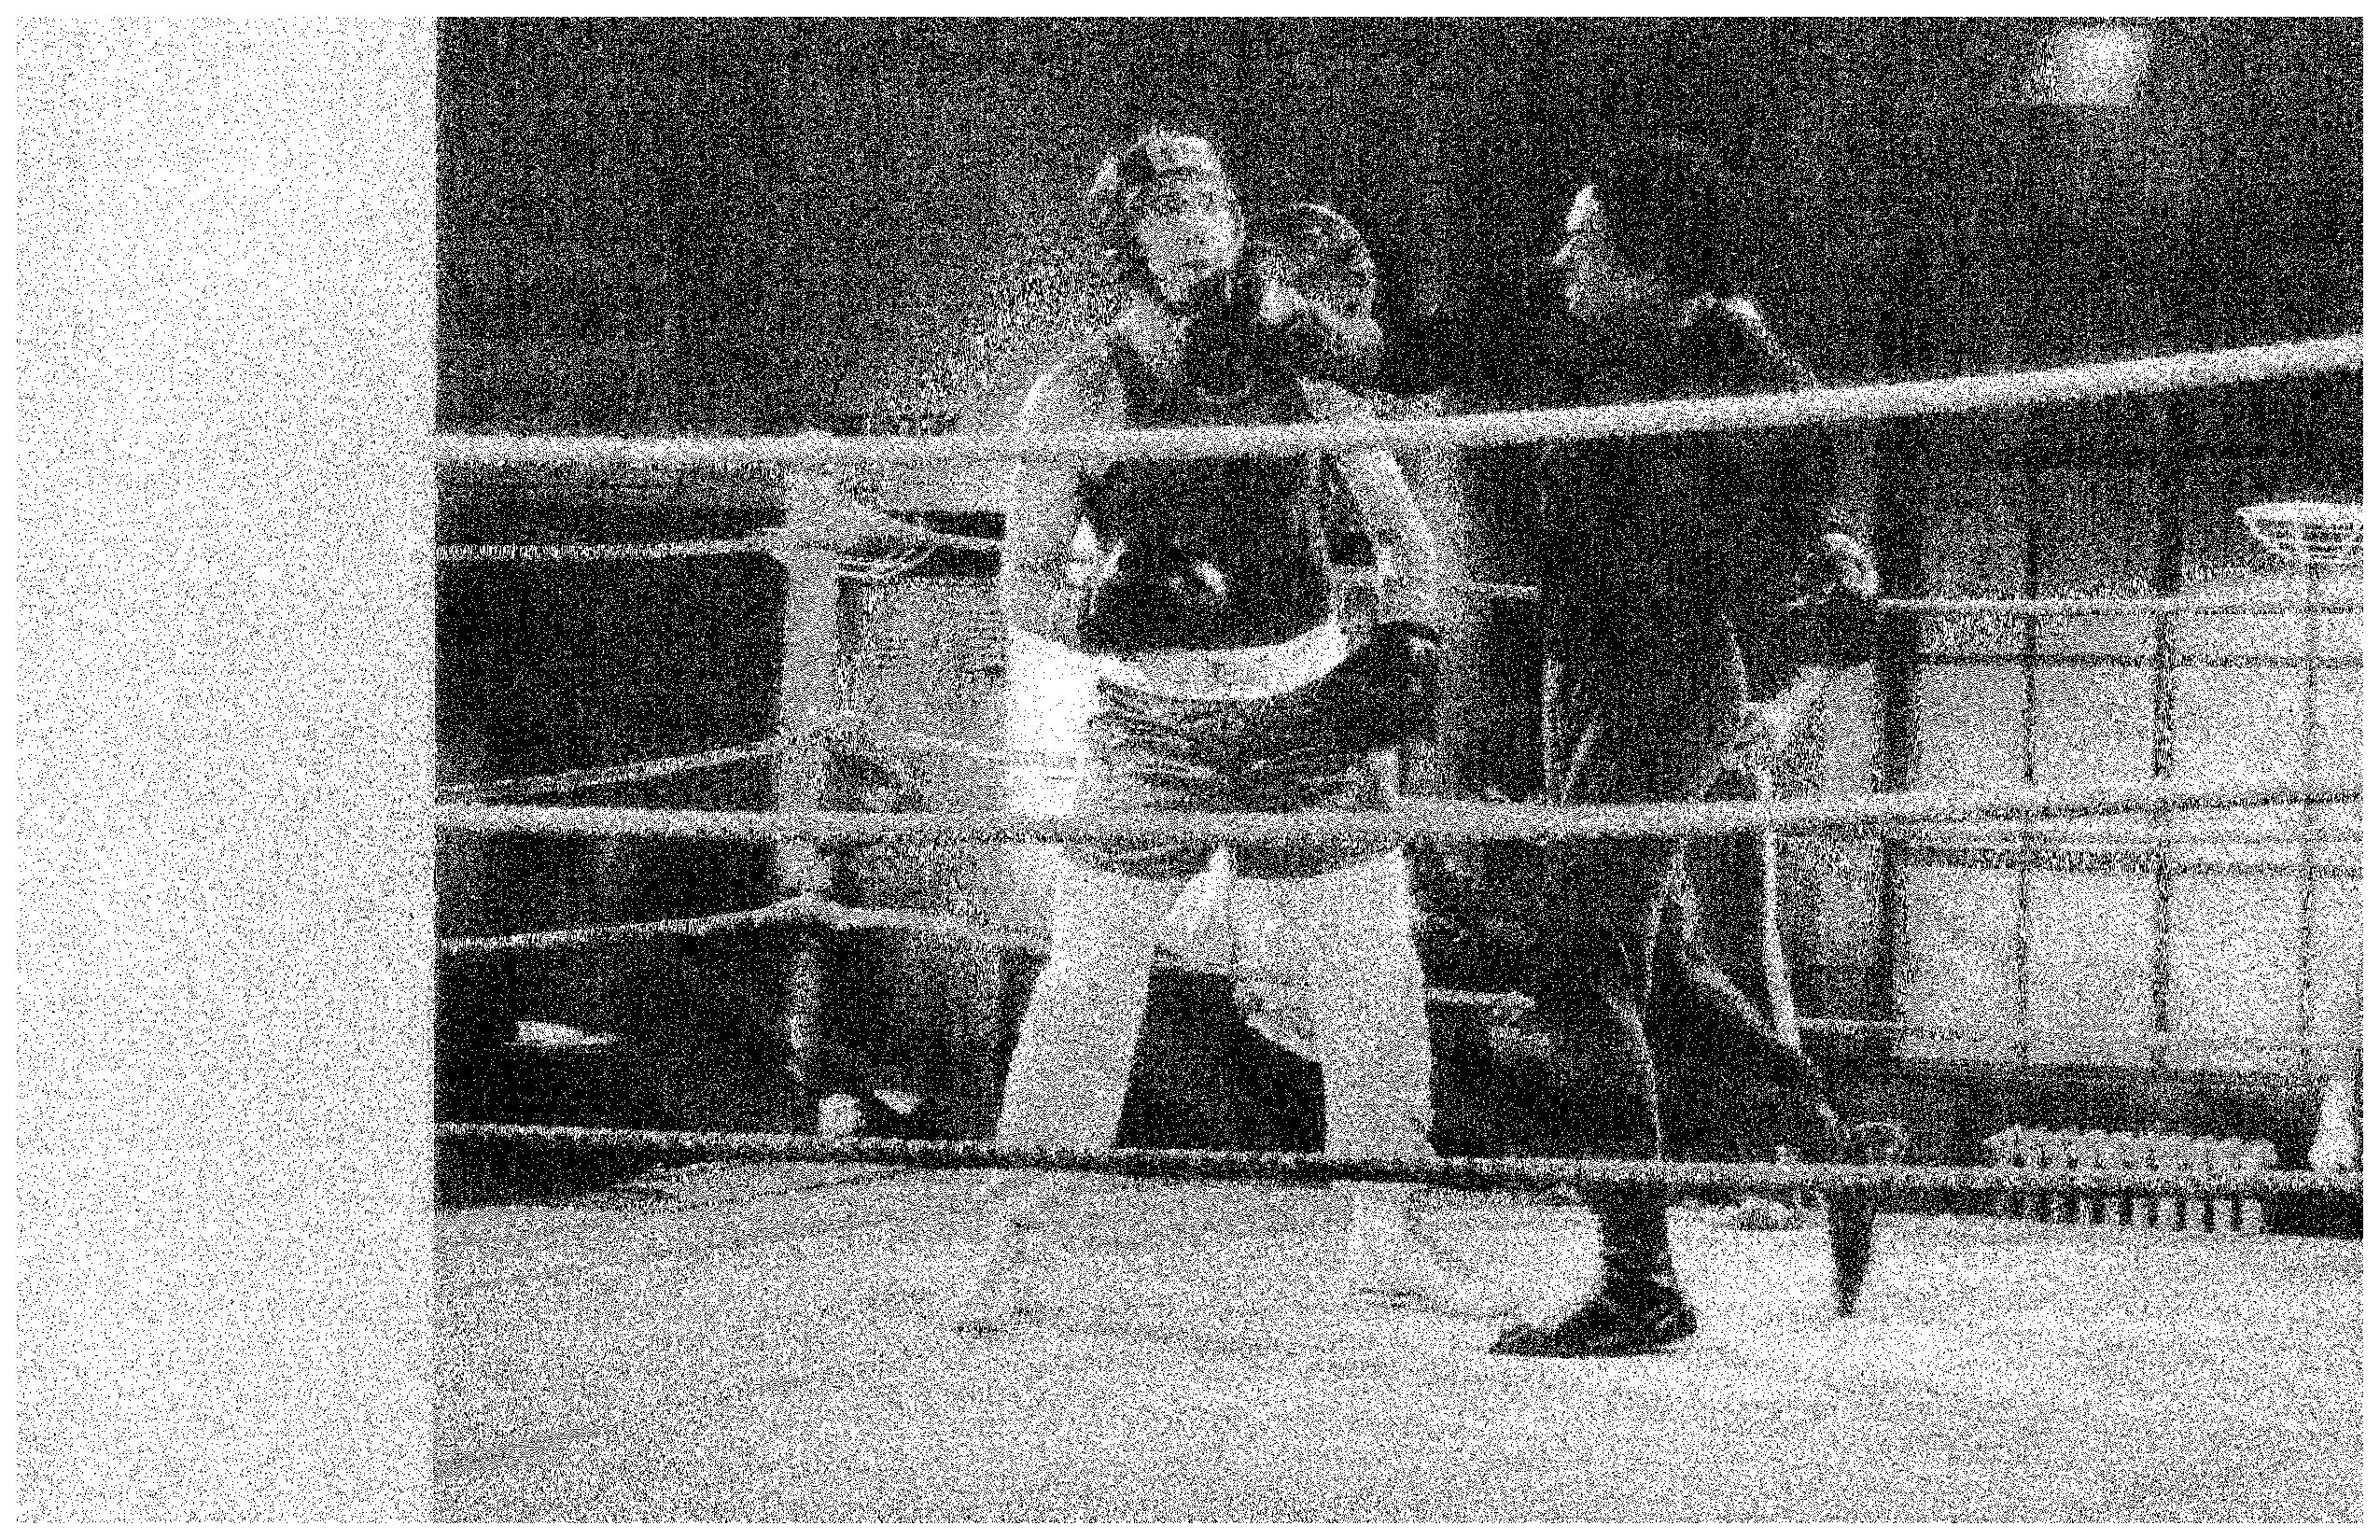 Rodney (Carl the Boxer)hits actor Judd Hirsch (Alex) with a vicious over hand right in a scene from the hit comedy 